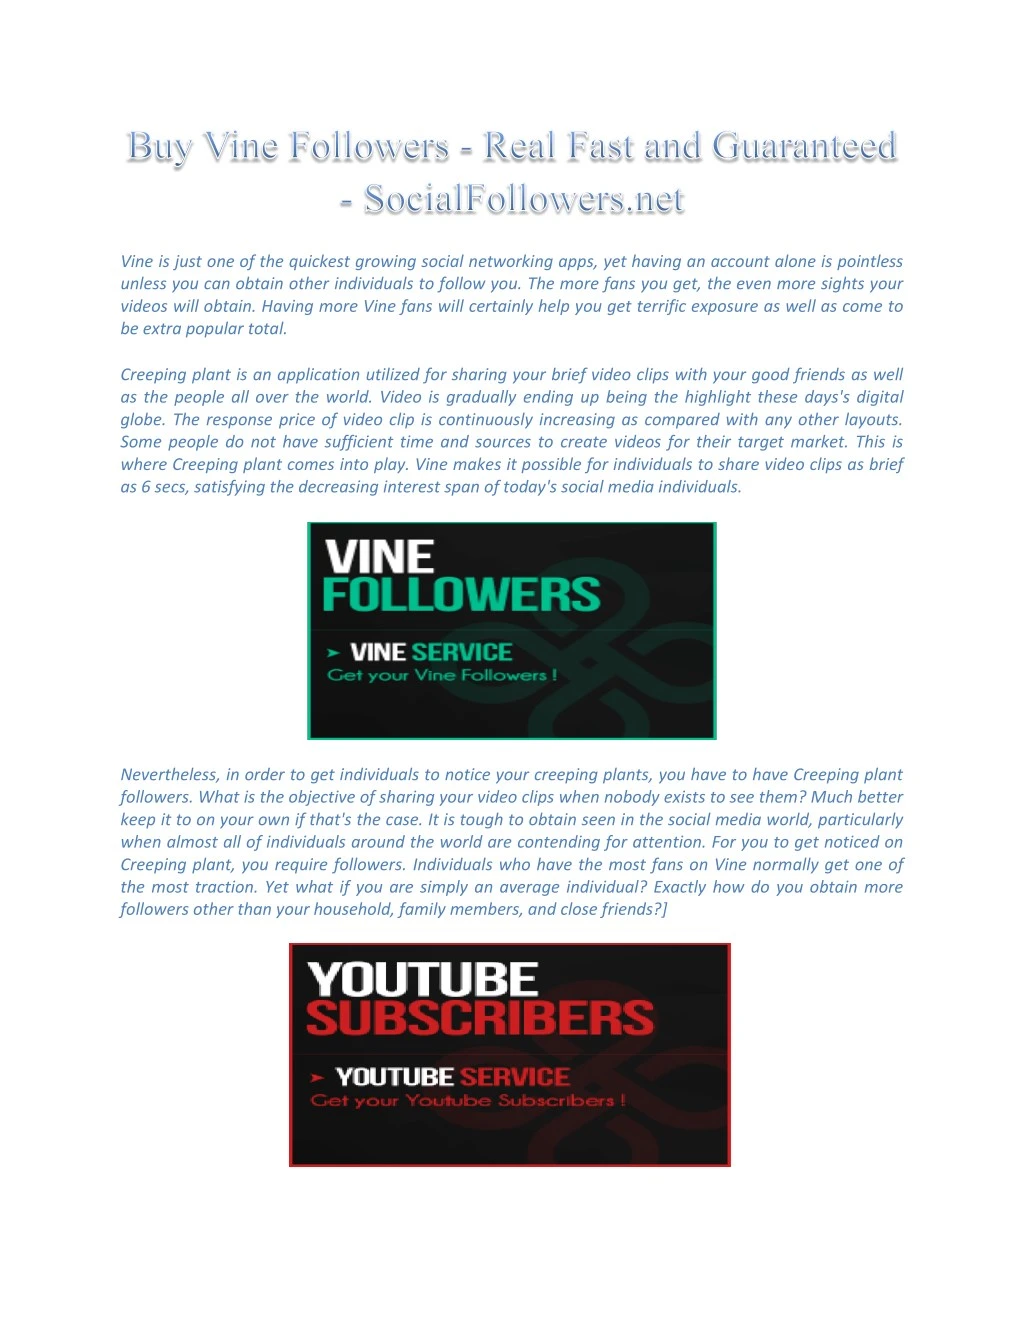 vine is just one of the quickest growing social